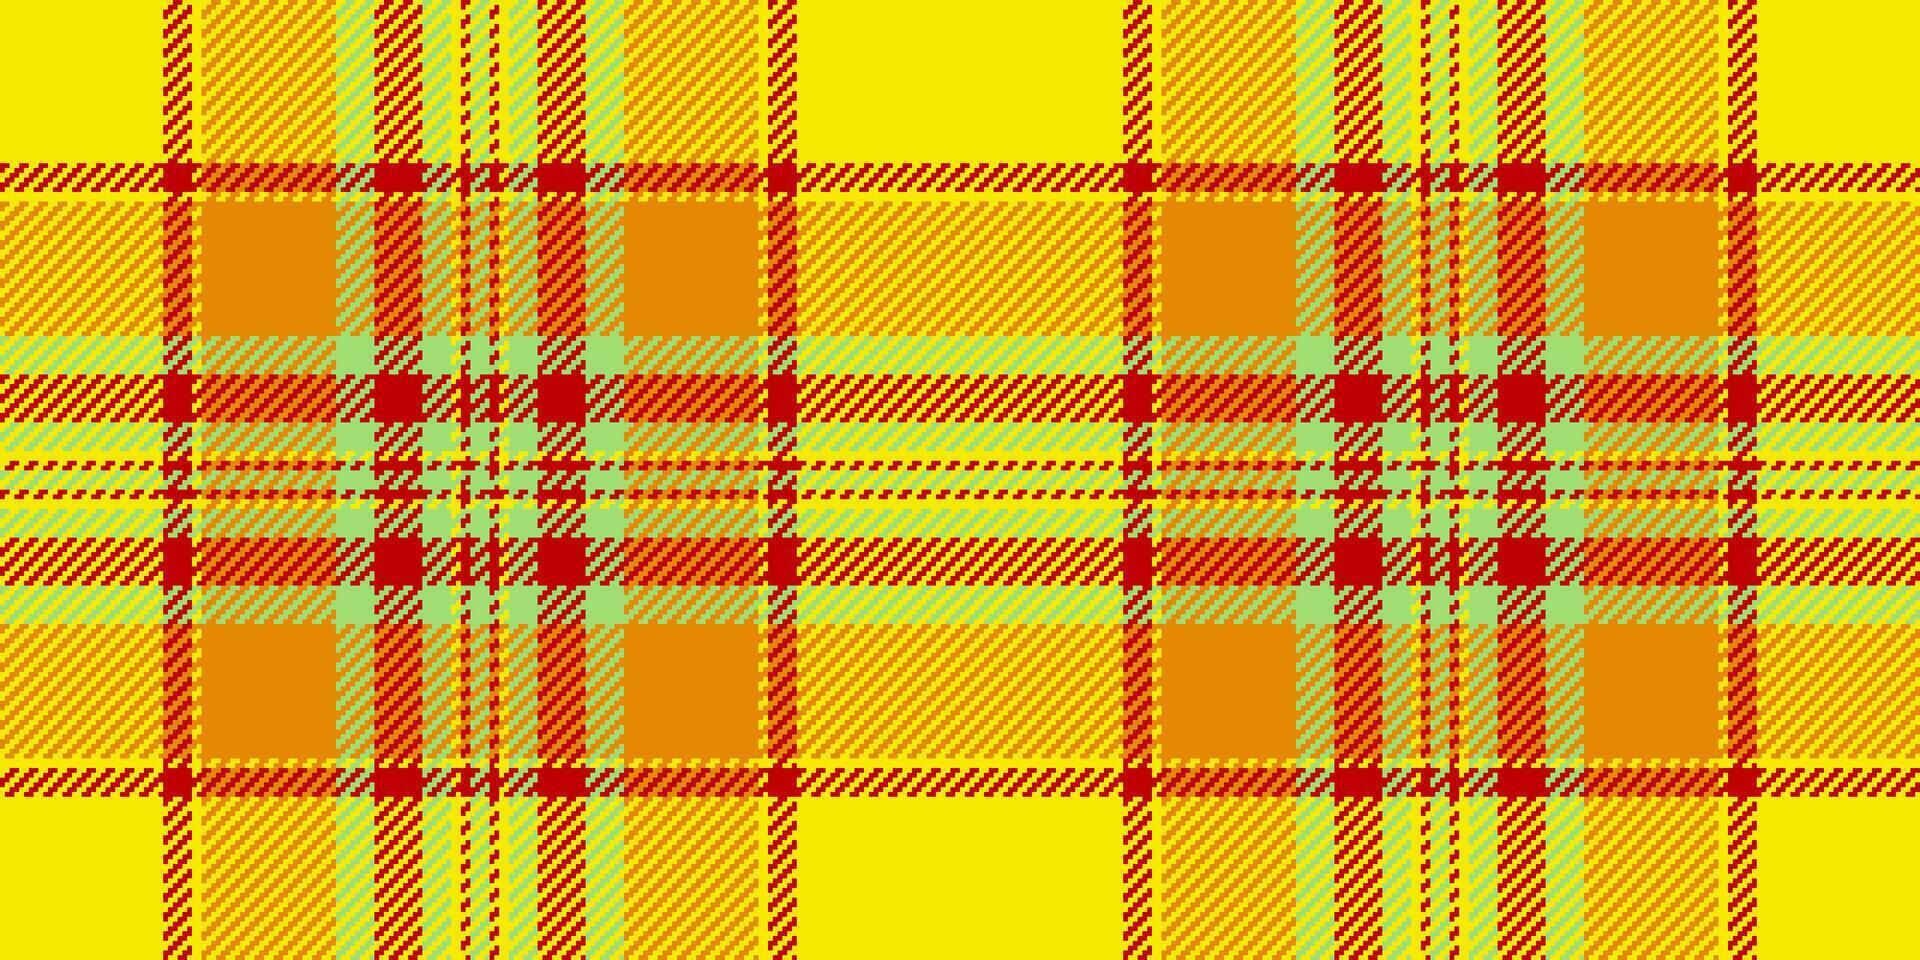 Patterned tartan background seamless, model textile fabric check. Luxurious vector plaid texture pattern in radioactive and amber colors.